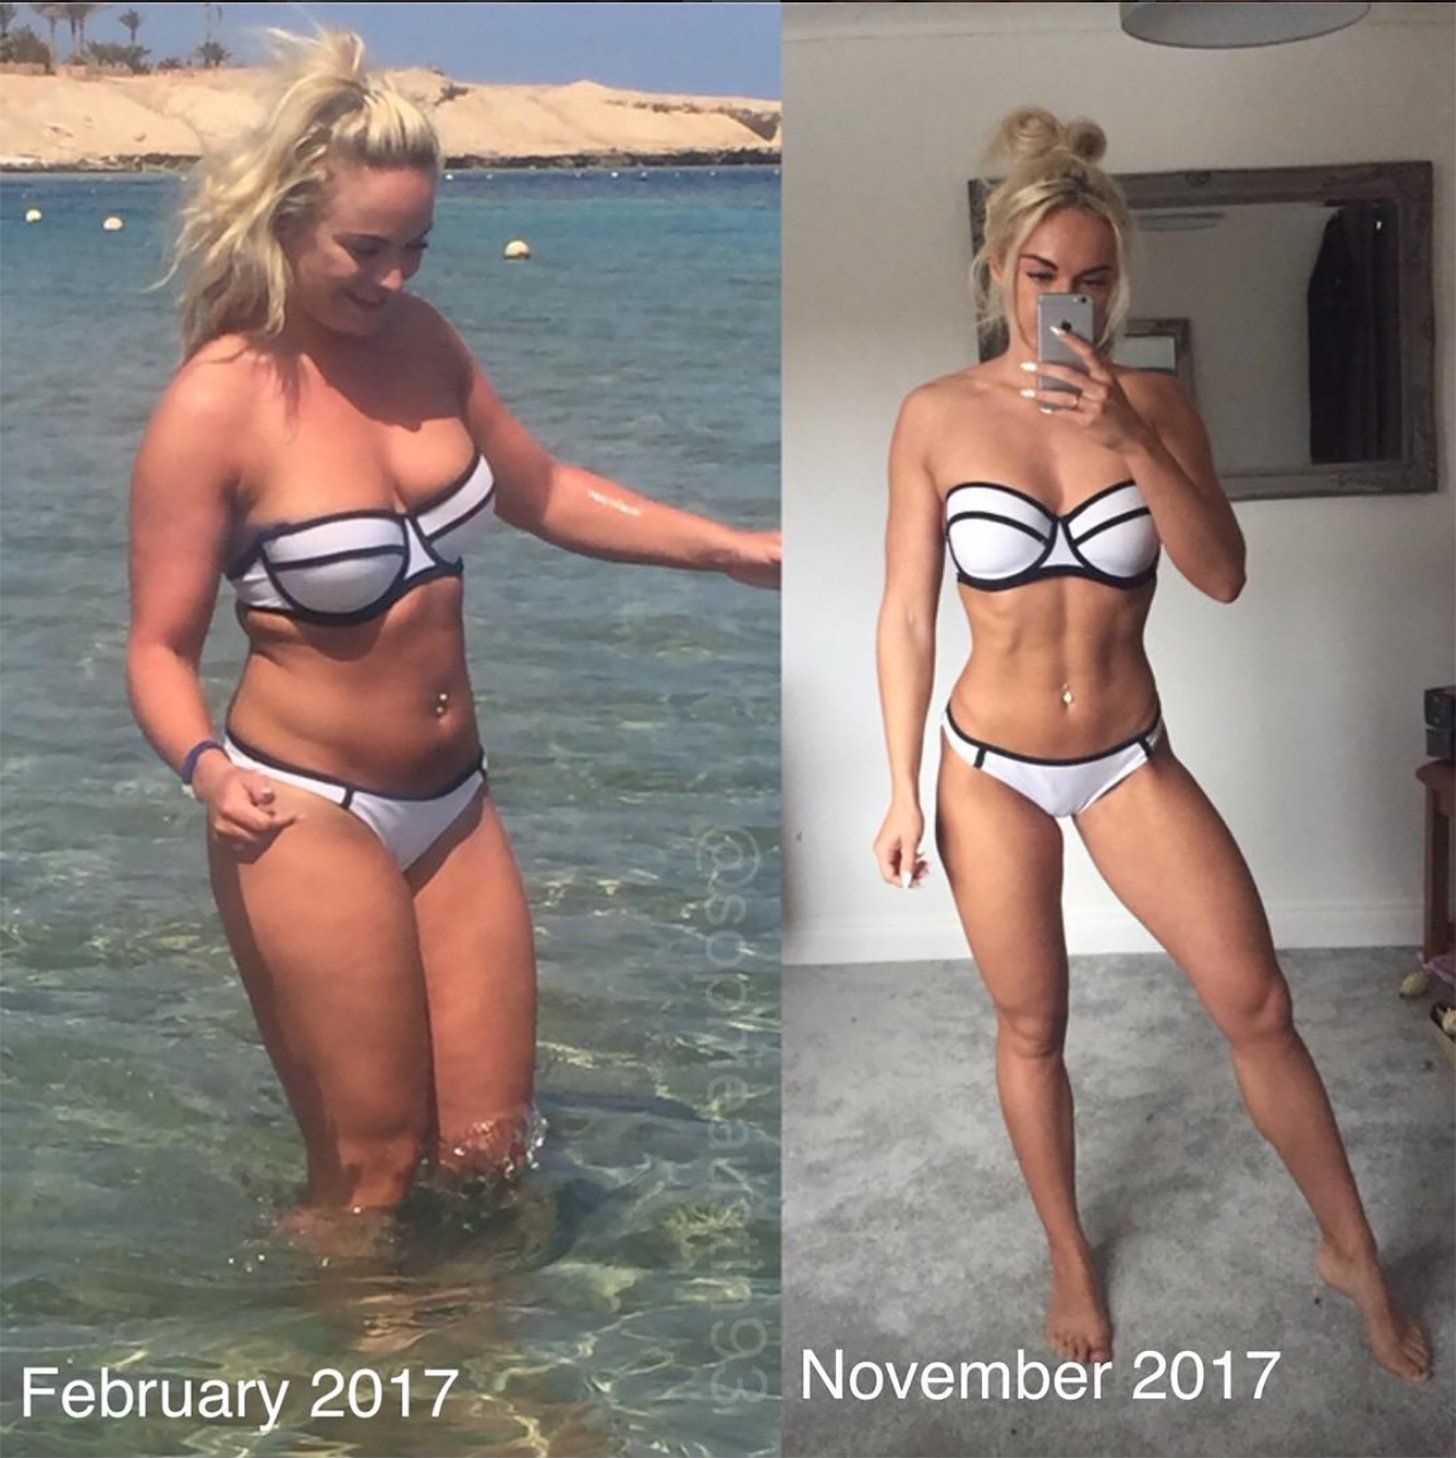 Sophie Dropped 35 Pounds in Less Than 1 Year Following This Popular Fitness Program -   8 1 year fitness Transformation
 ideas